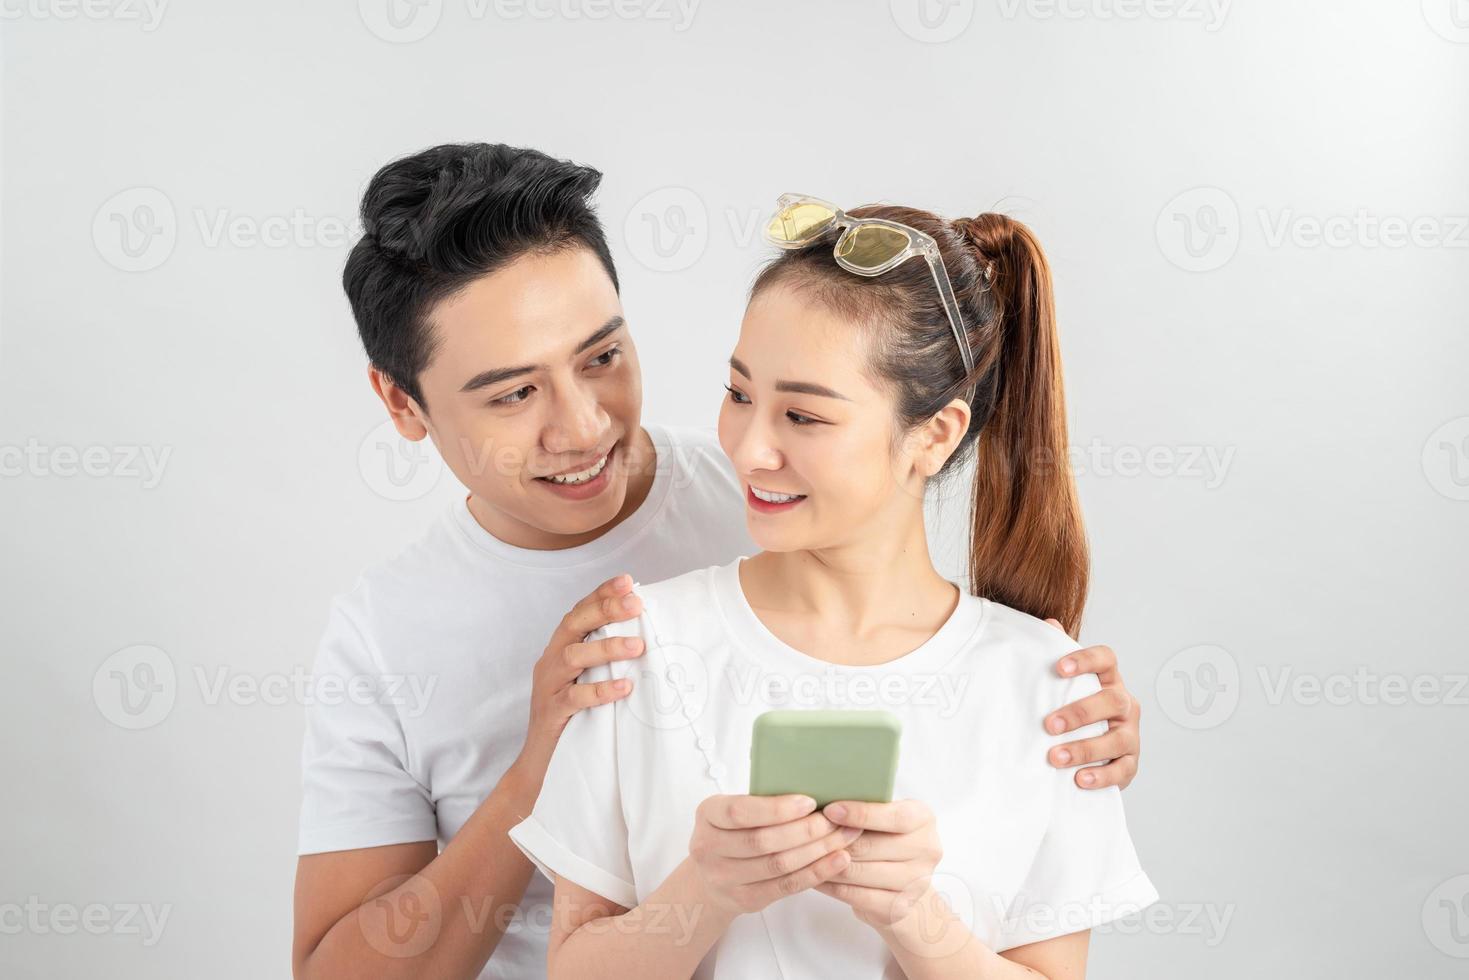 Curious boyfriend is spying his lovers smartphone. They are wearing casual shirts, standing isolated on white background photo